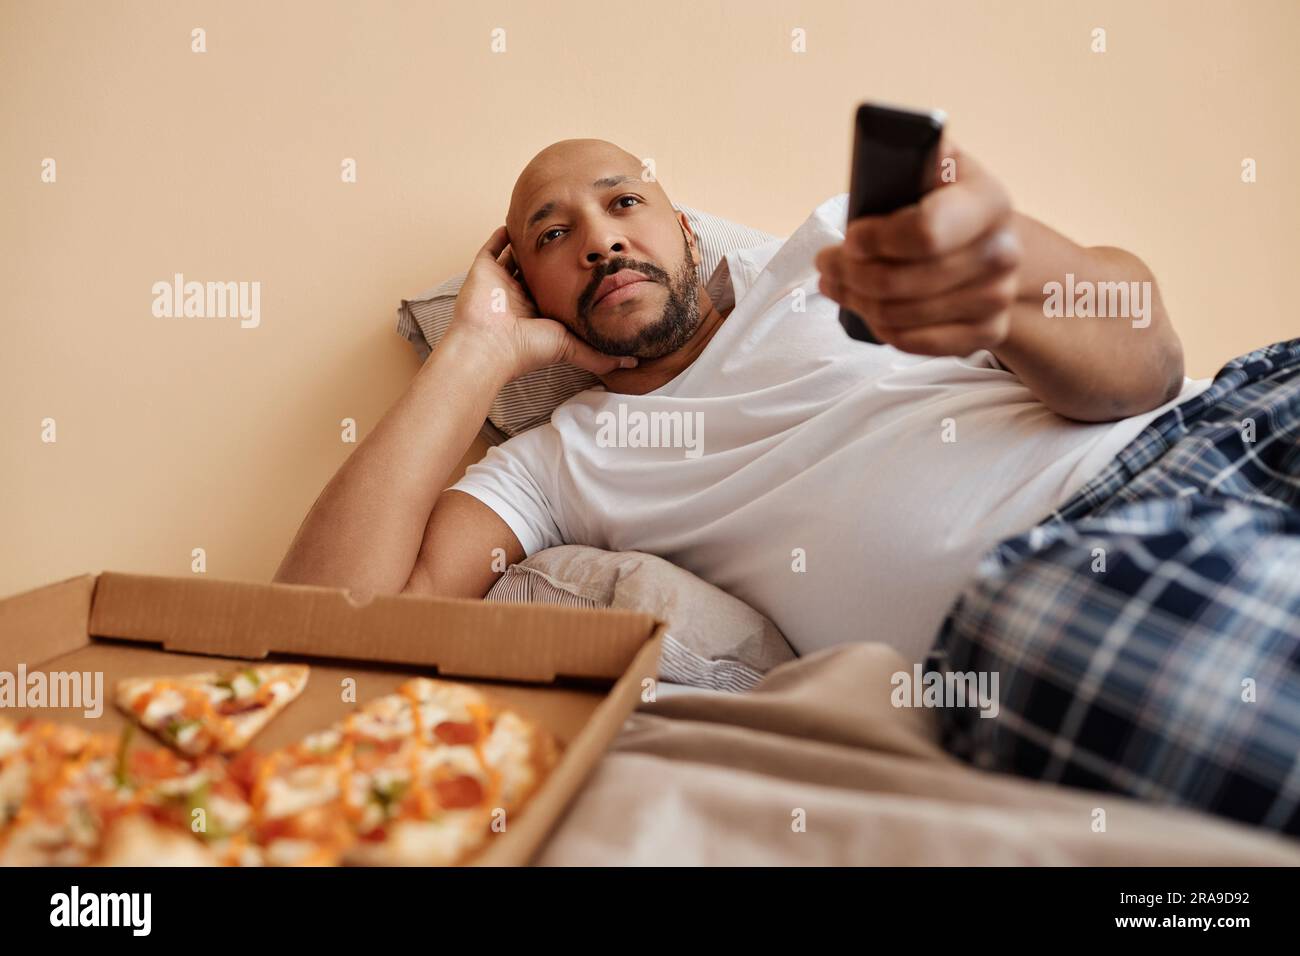 Portrait of bored adult man watching TV at home and lying on bed with pizza, copy space Stock Photo